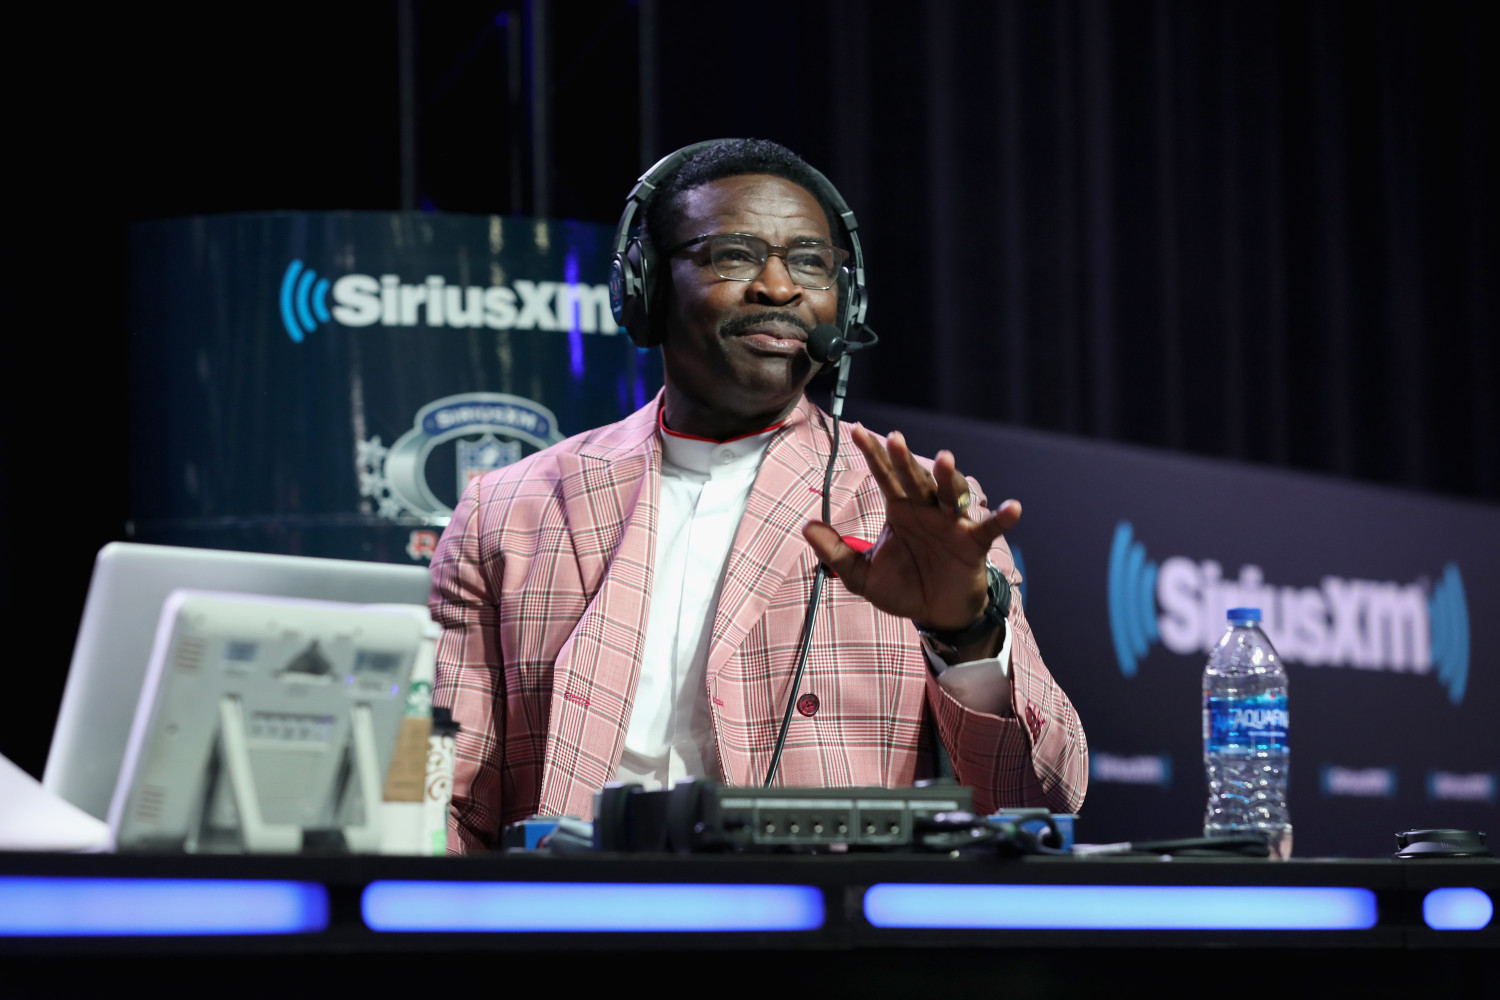 Former Dallas Cowboys Player Michael Irvin Declared Cancer Free After Medical Tests